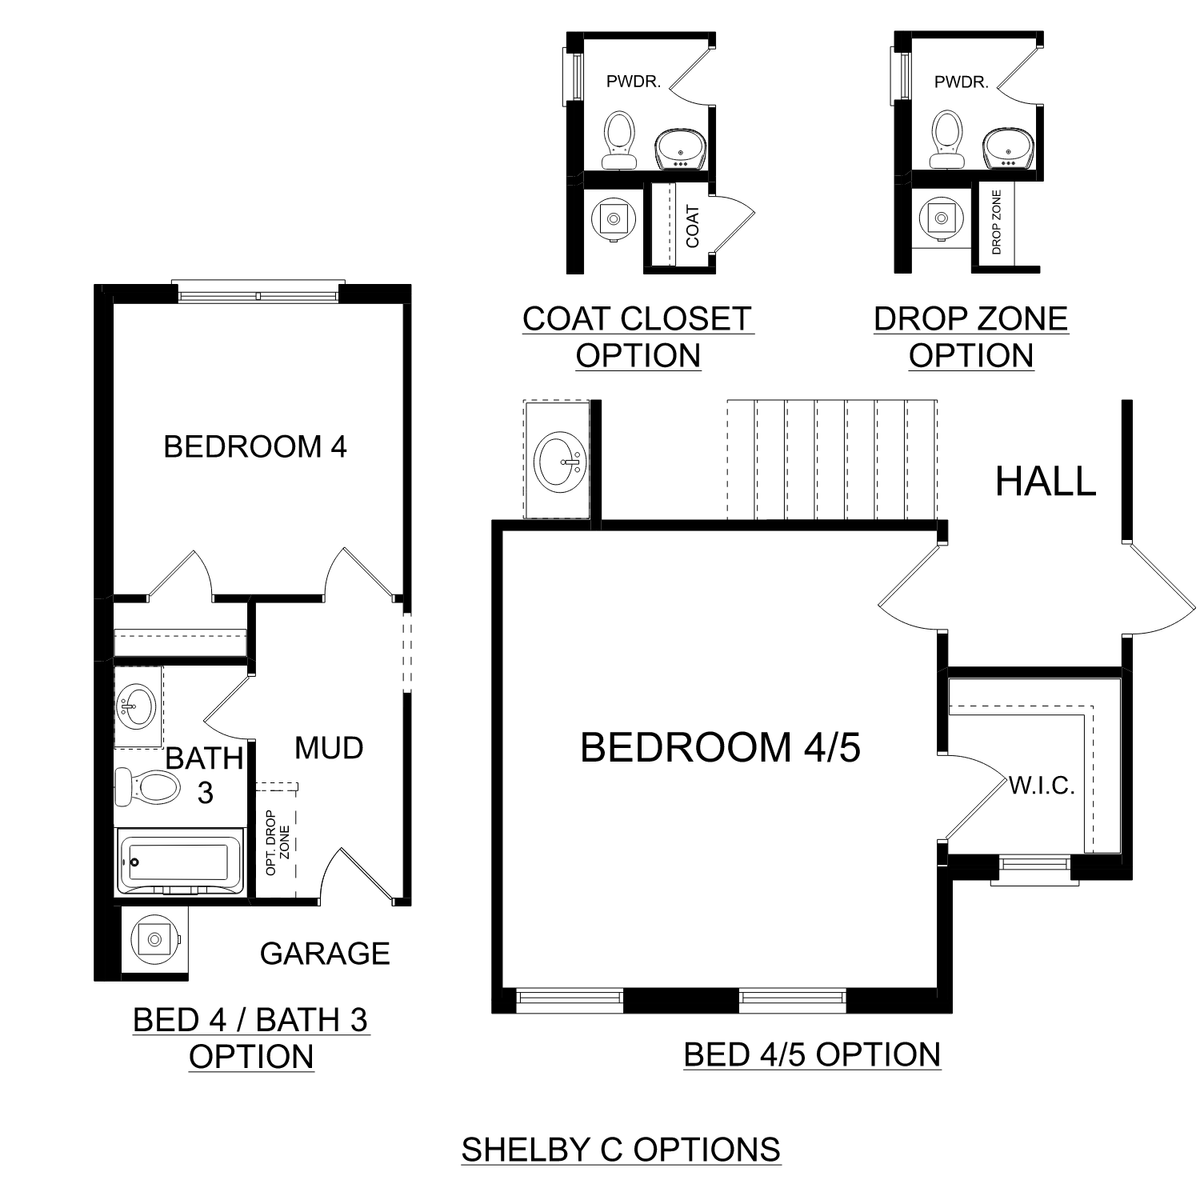 3 - The Shelby C buildable floor plan layout in Davidson Homes' Flint Meadows community.